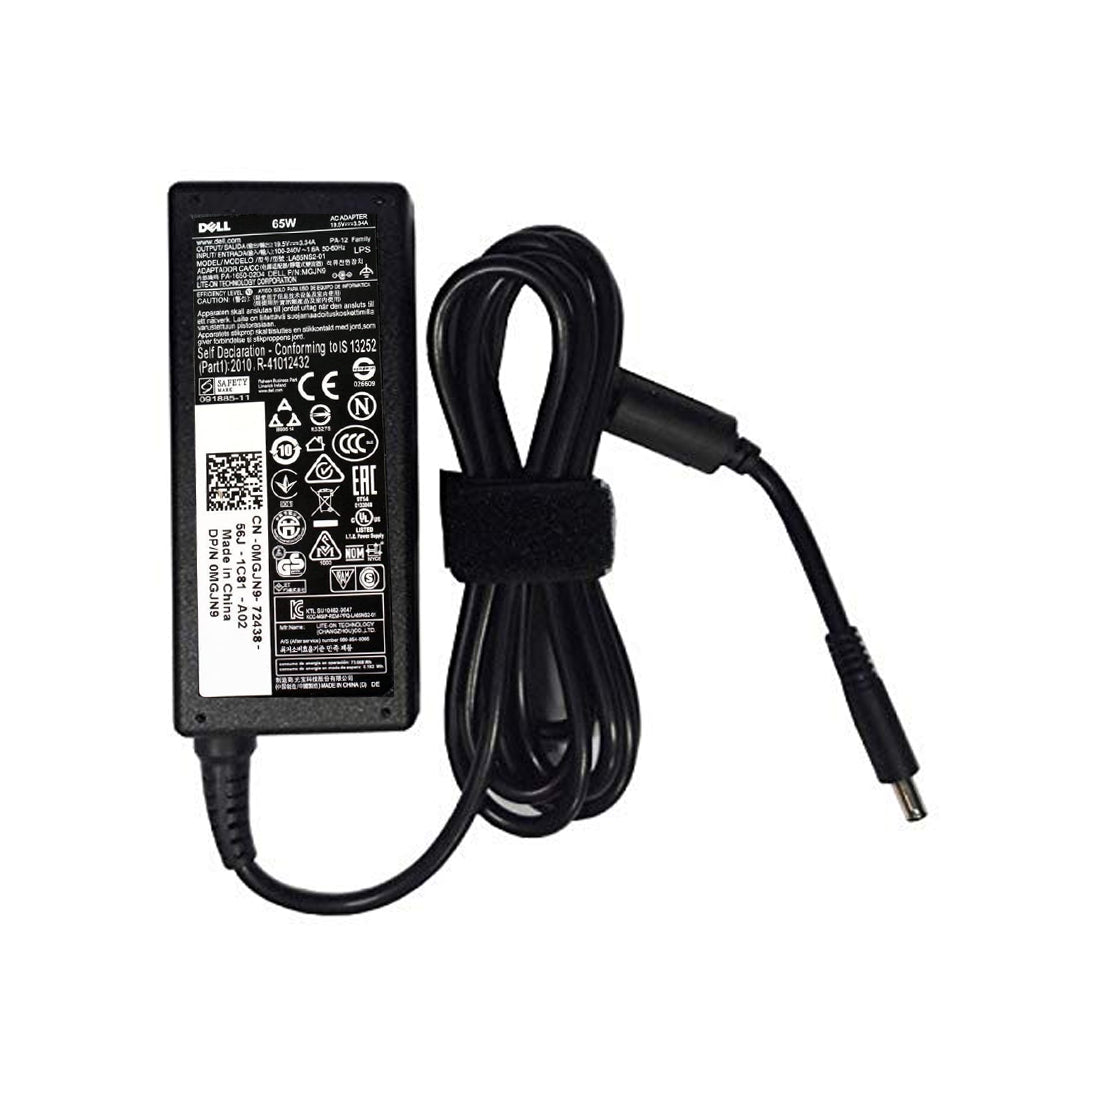 Dell Original 65W 19.5V 4.5mm Pin Laptop Charger Adapter for Inspiron 15 3559 With Power Cord